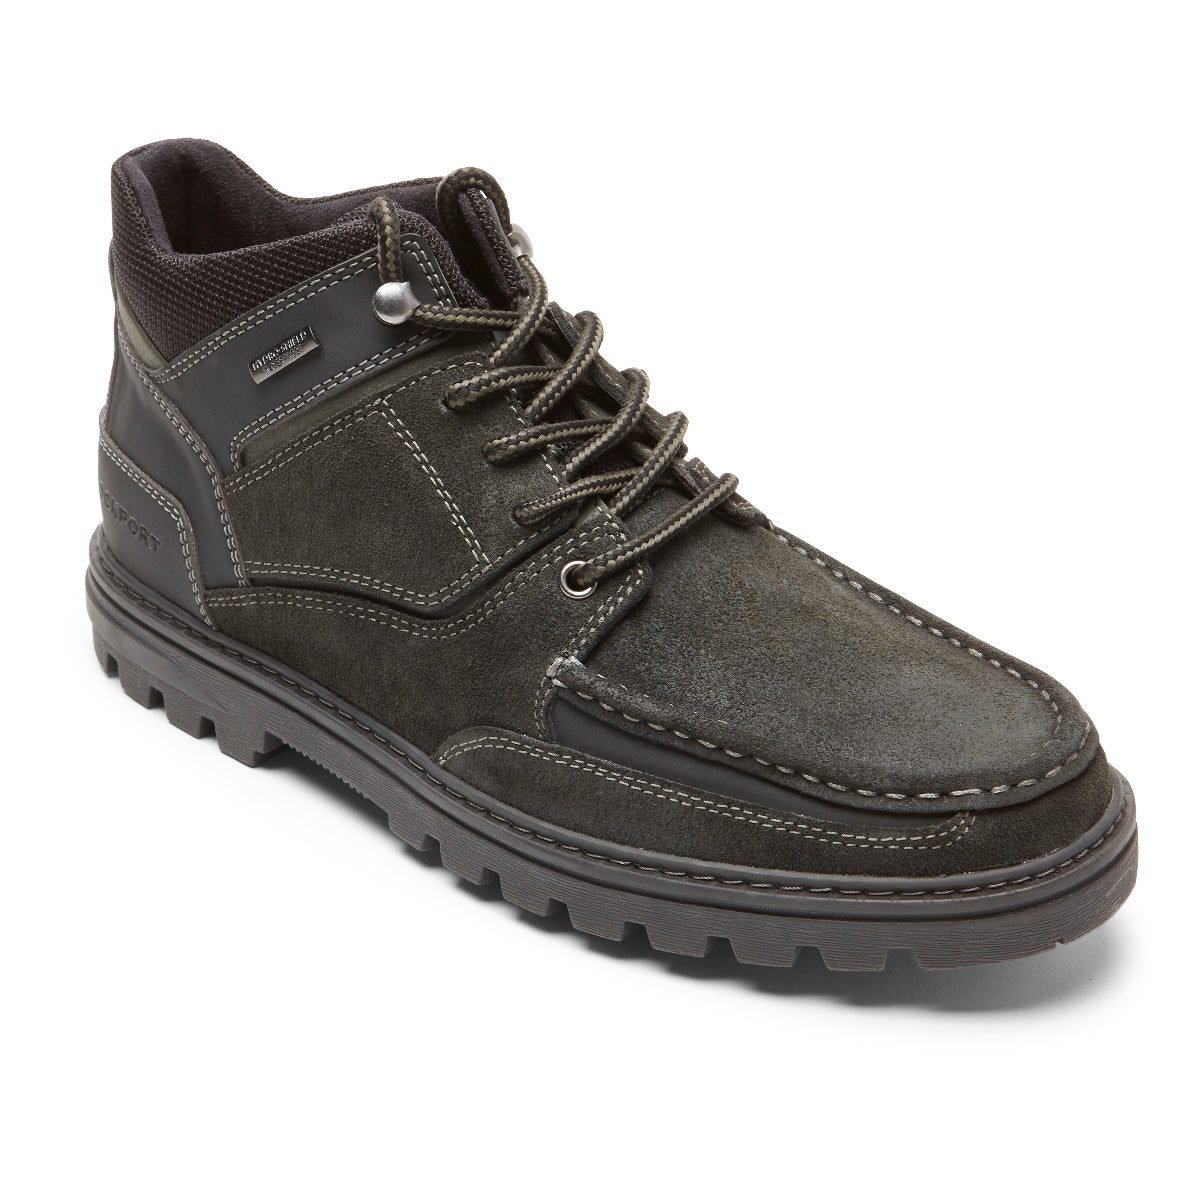 Rockport Mens Weather-Ready Boot ? Waterproof